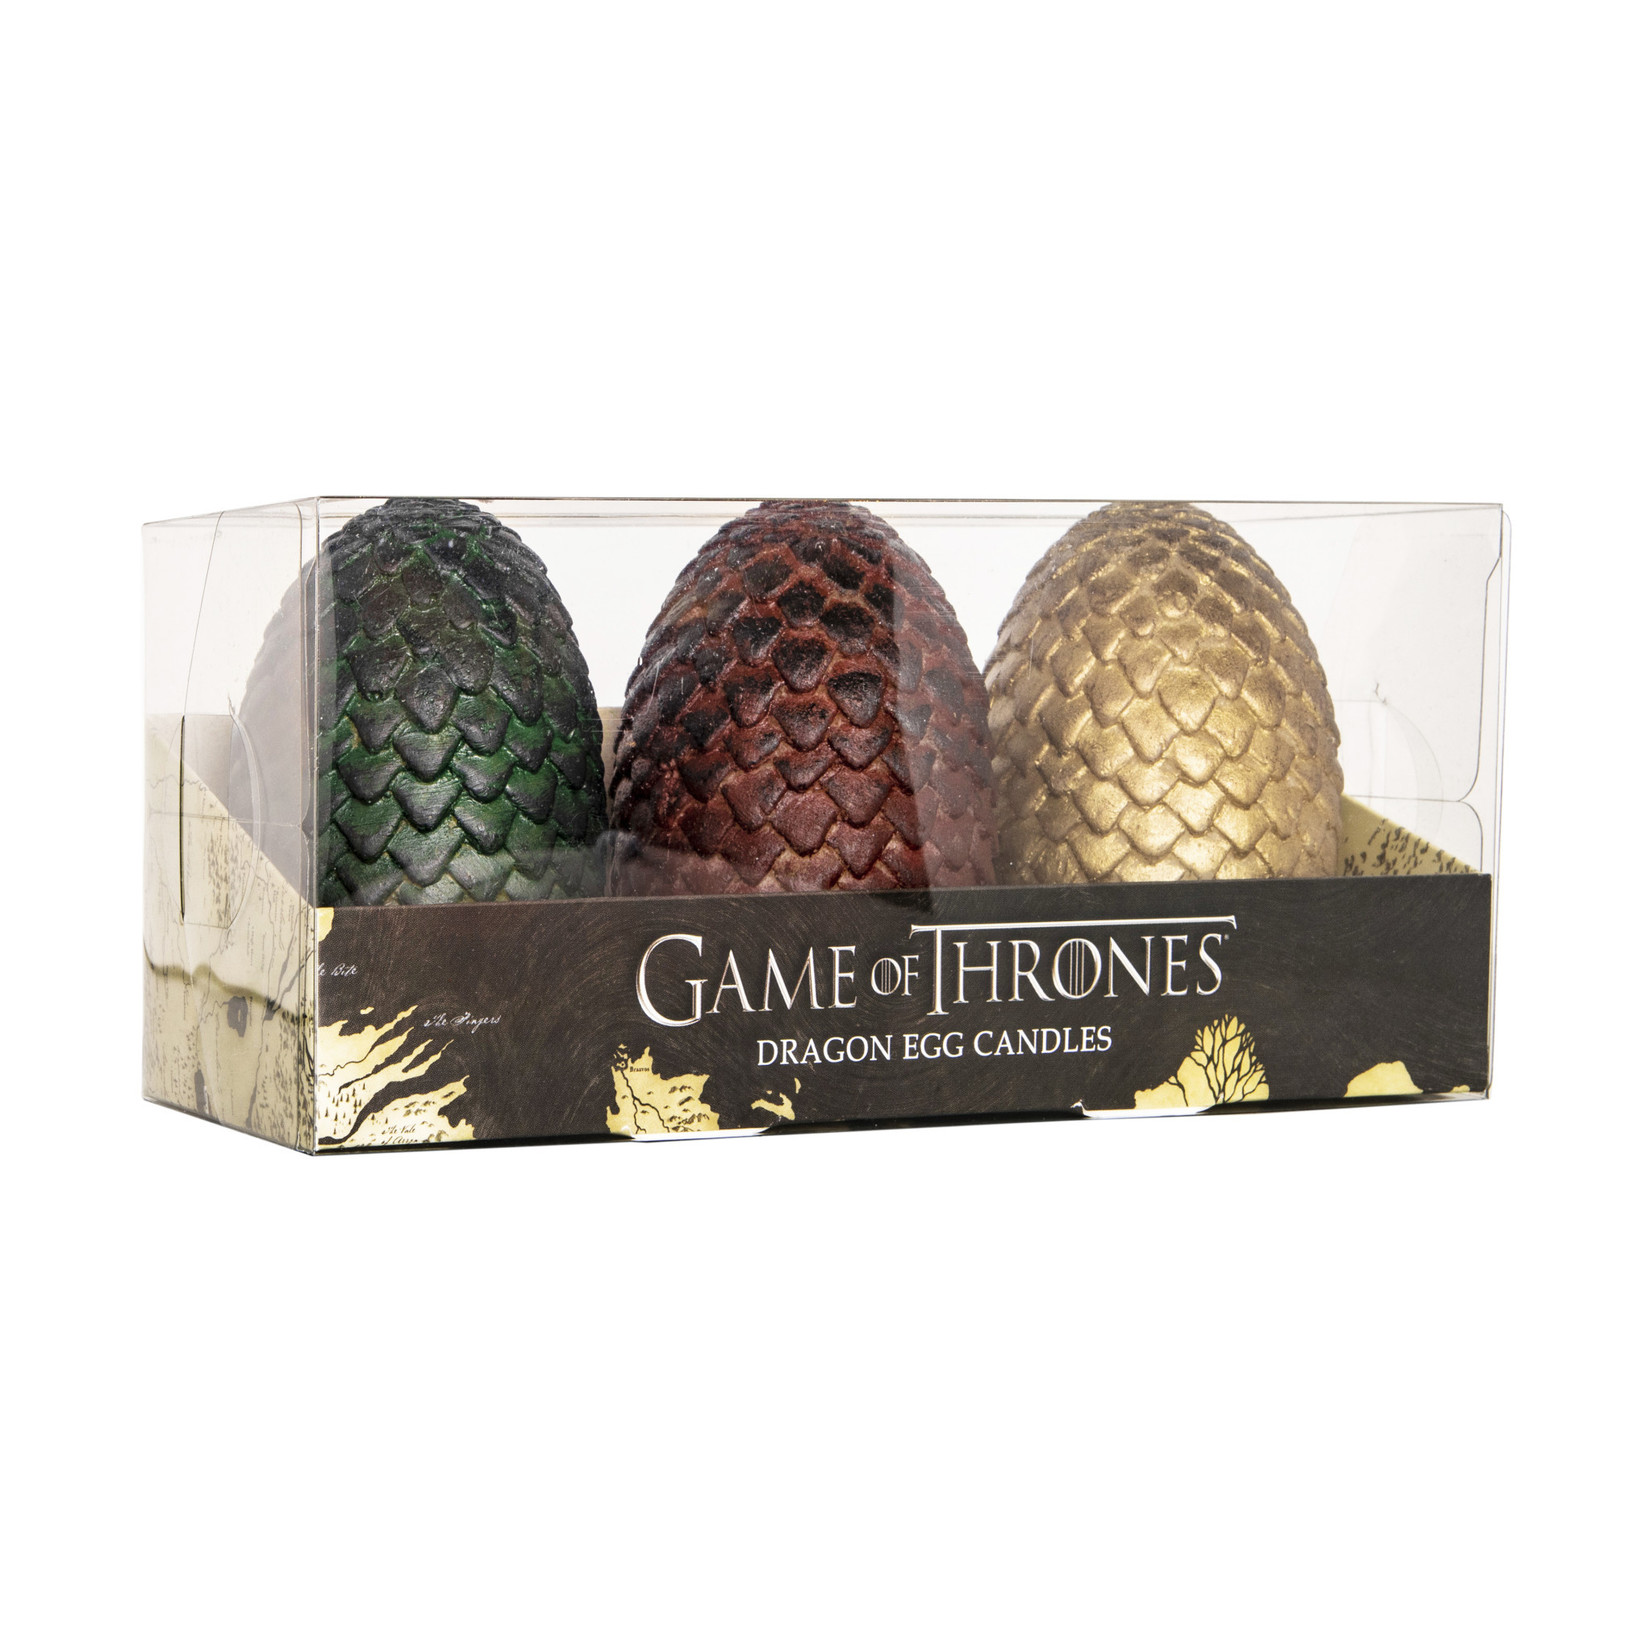 Game of Thrones Sculpted Dragon Egg Candles